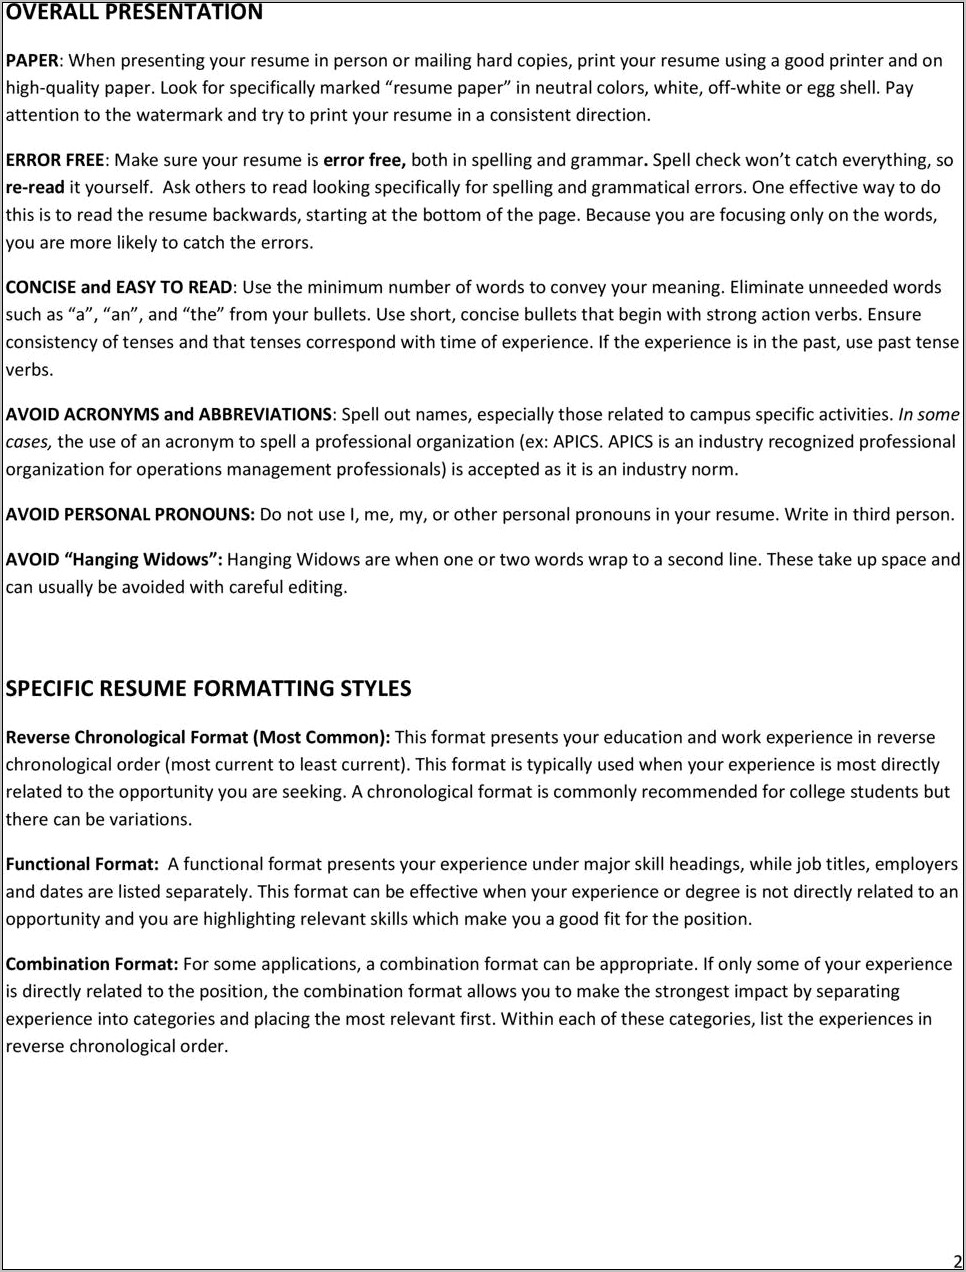 Resume Work Experience Not Directly Related To Position